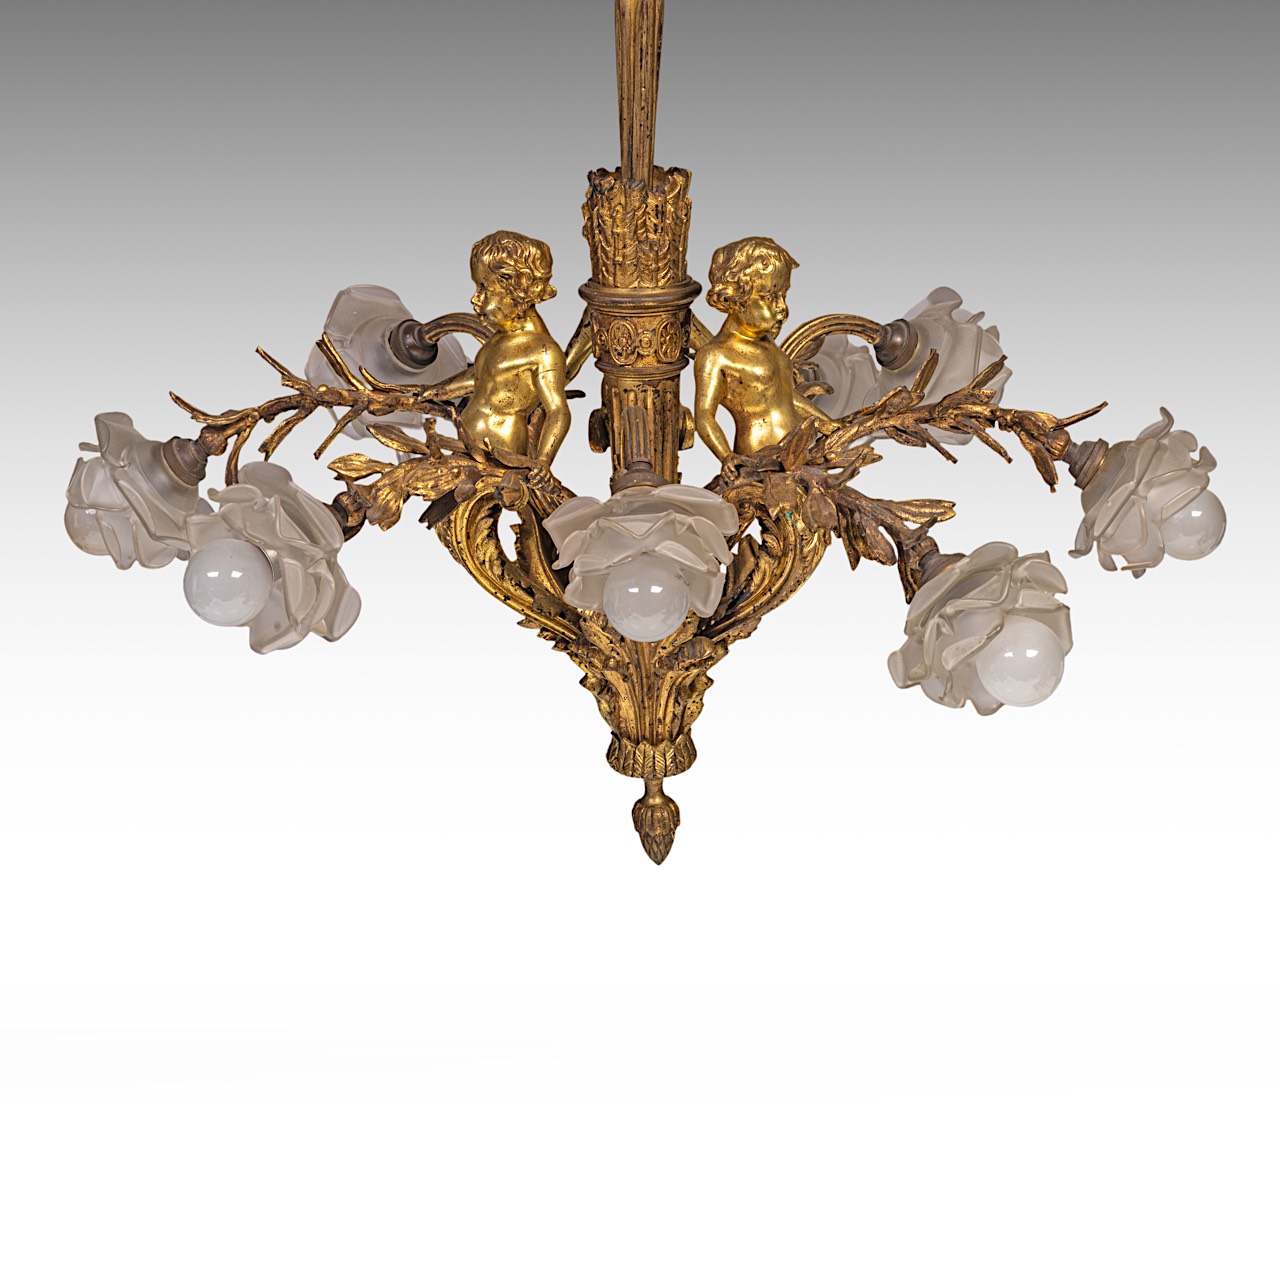 A Neoclassical gilt bronze chandelier, decorated with putti, H 80 cm - Image 6 of 7